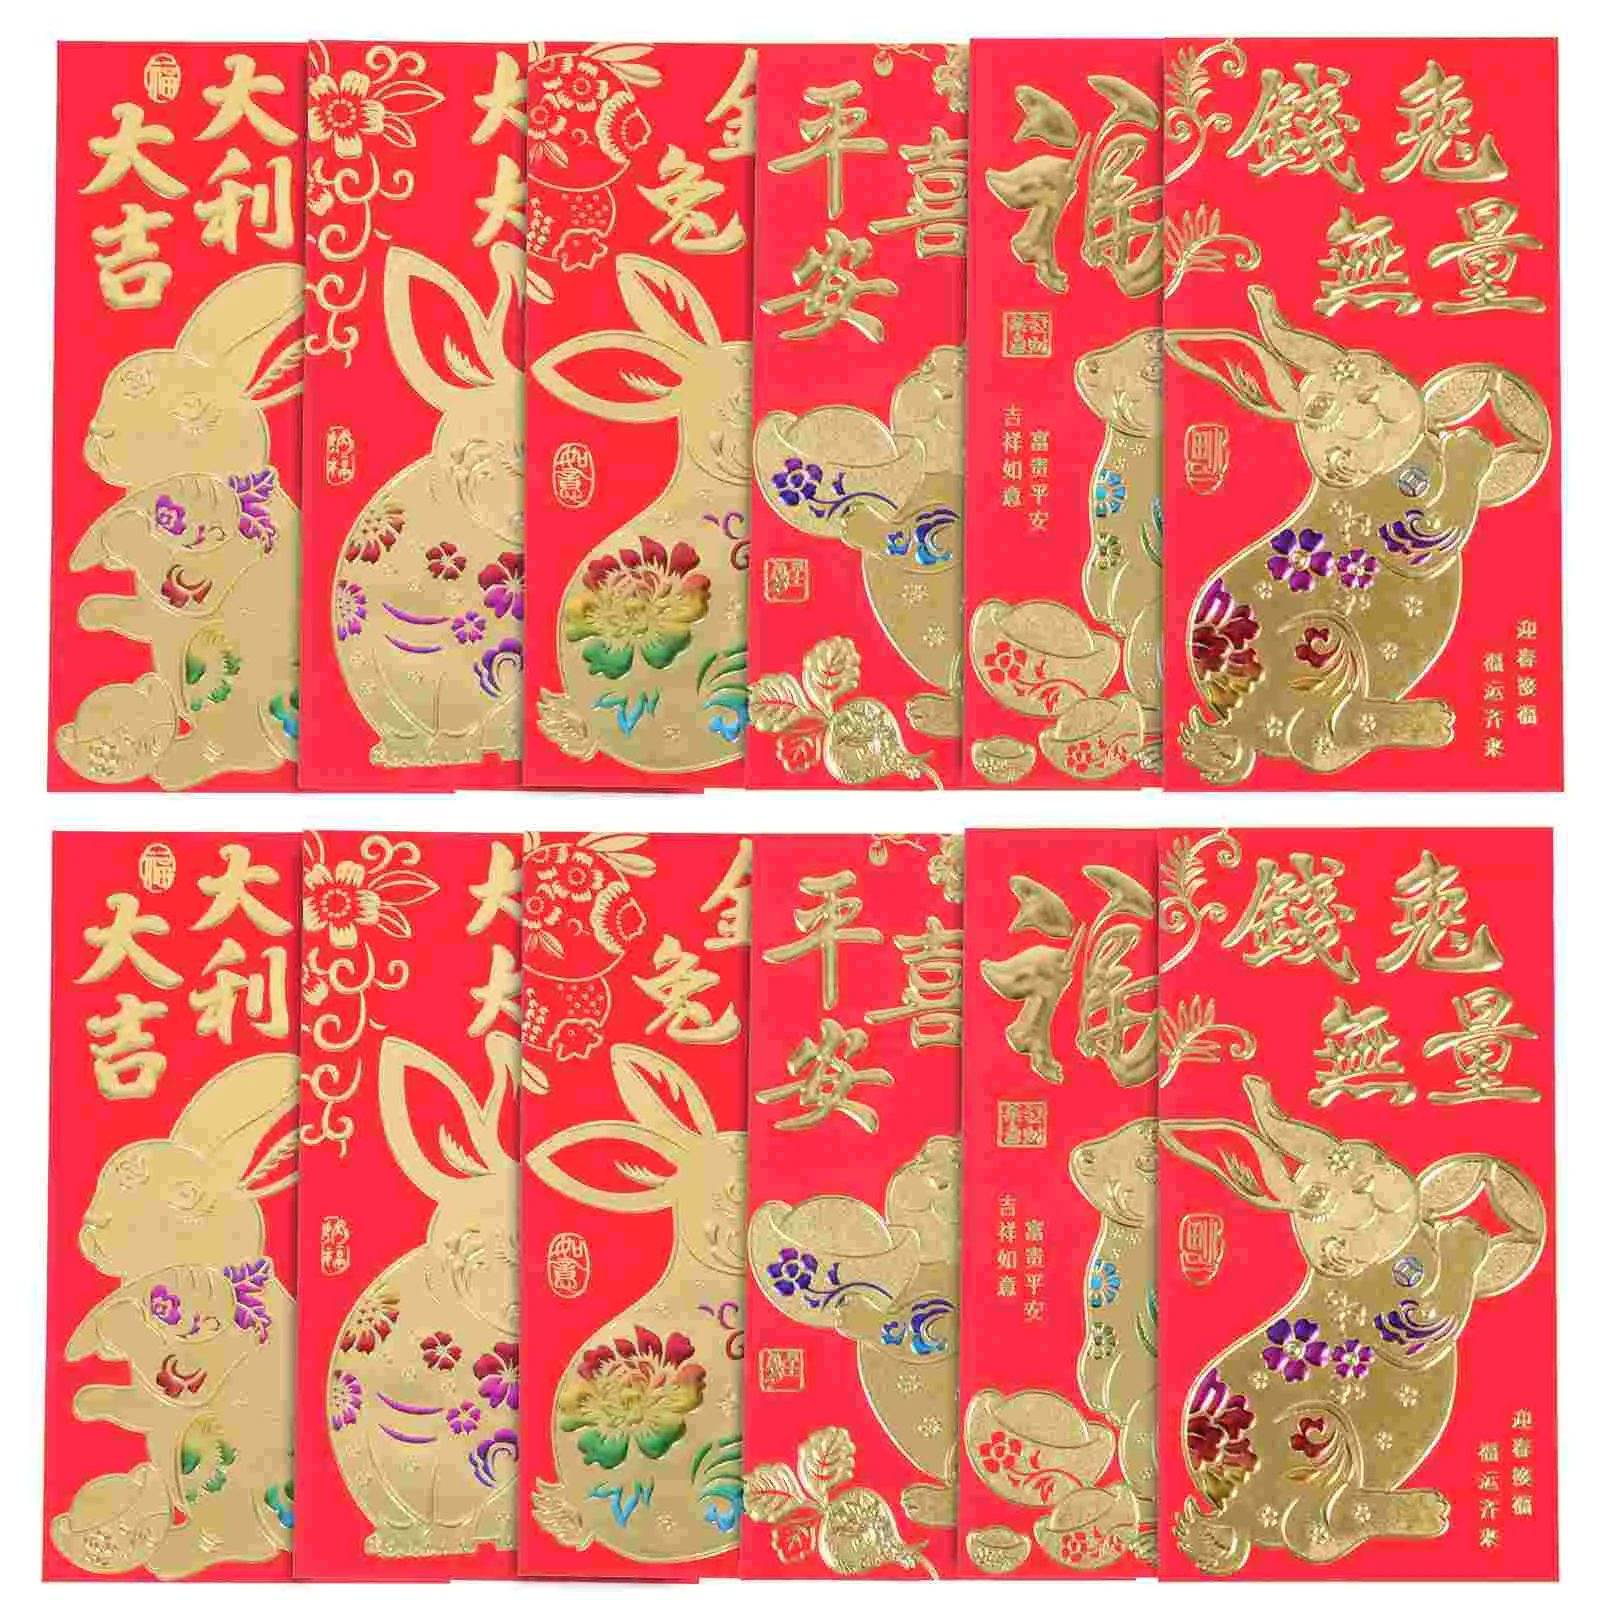 

Red Year Envelopes Money Rabbit Packet Envelope New Chinese Packets Festival Zodiac Pocket Spring Wedding Cash The Paper Luck